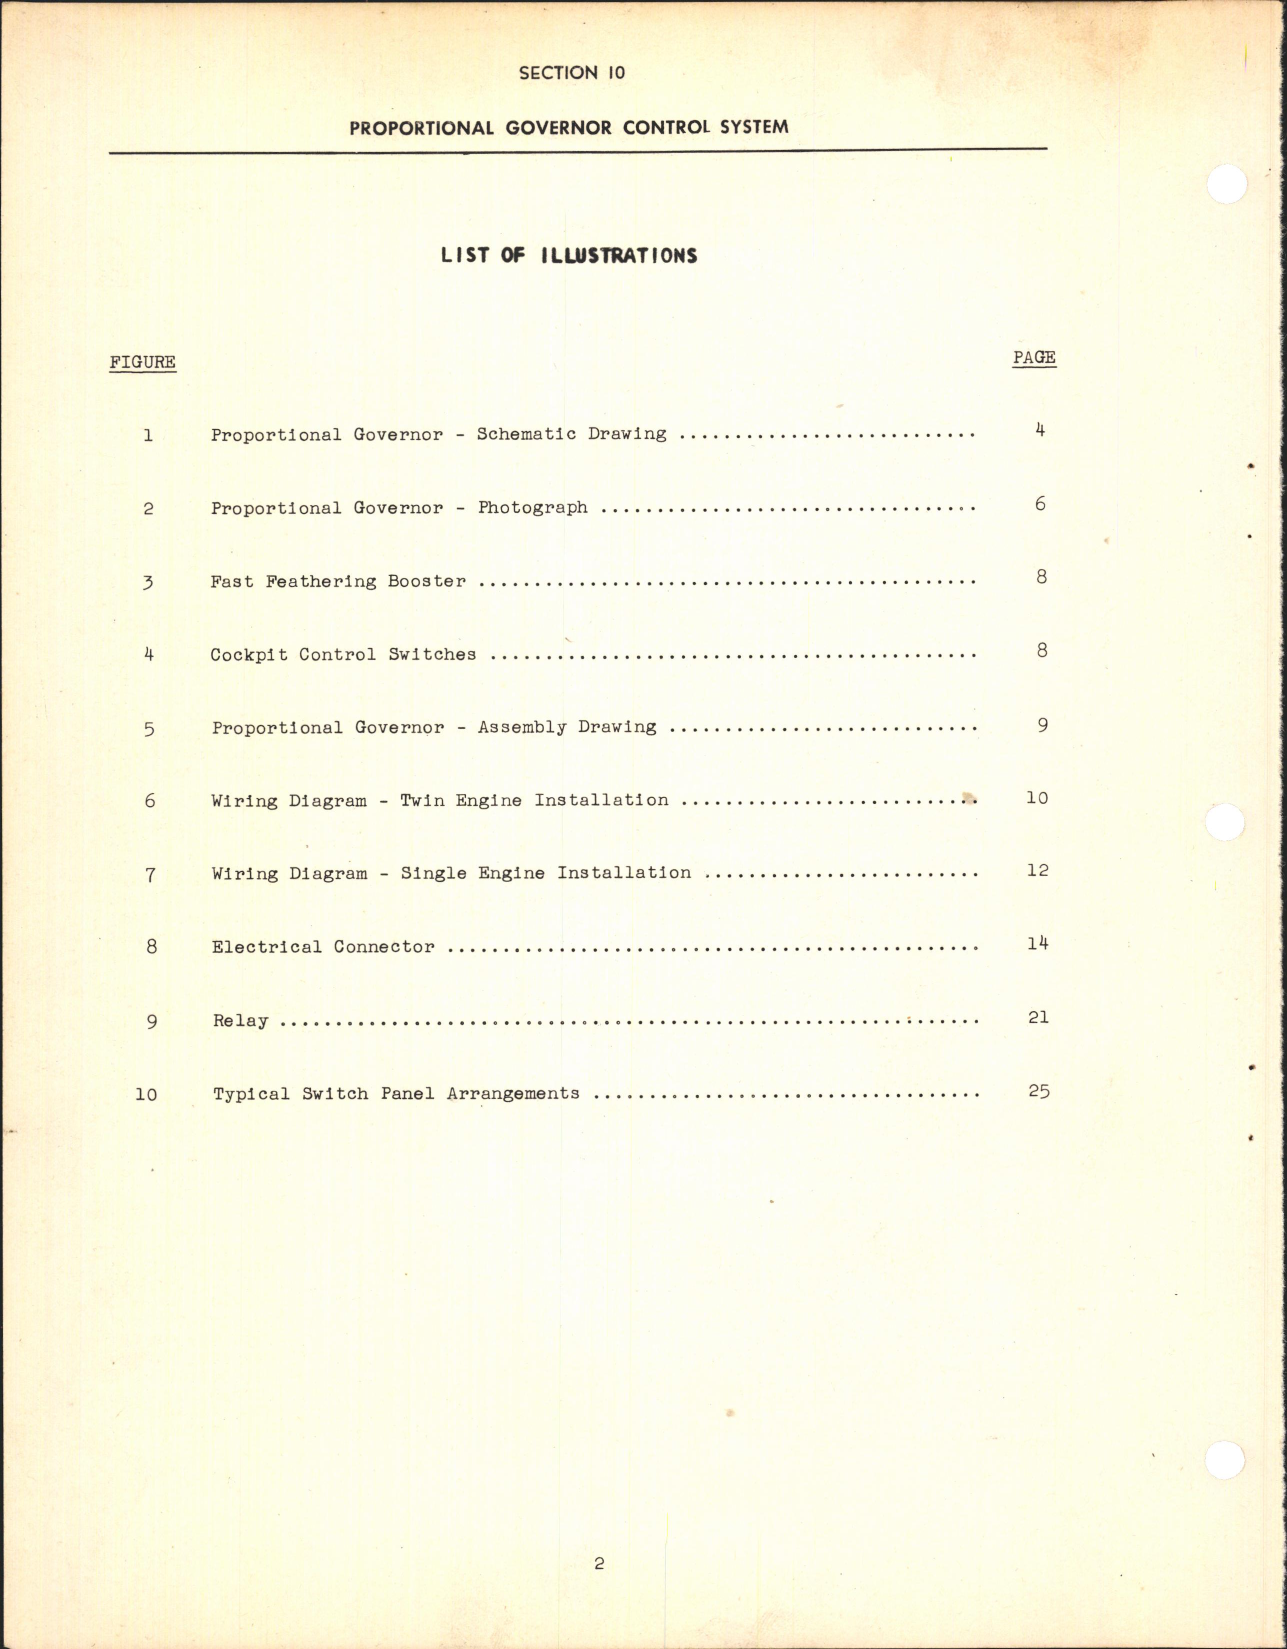 Sample page 4 from AirCorps Library document: Section 10 - Proportional Governor Control System